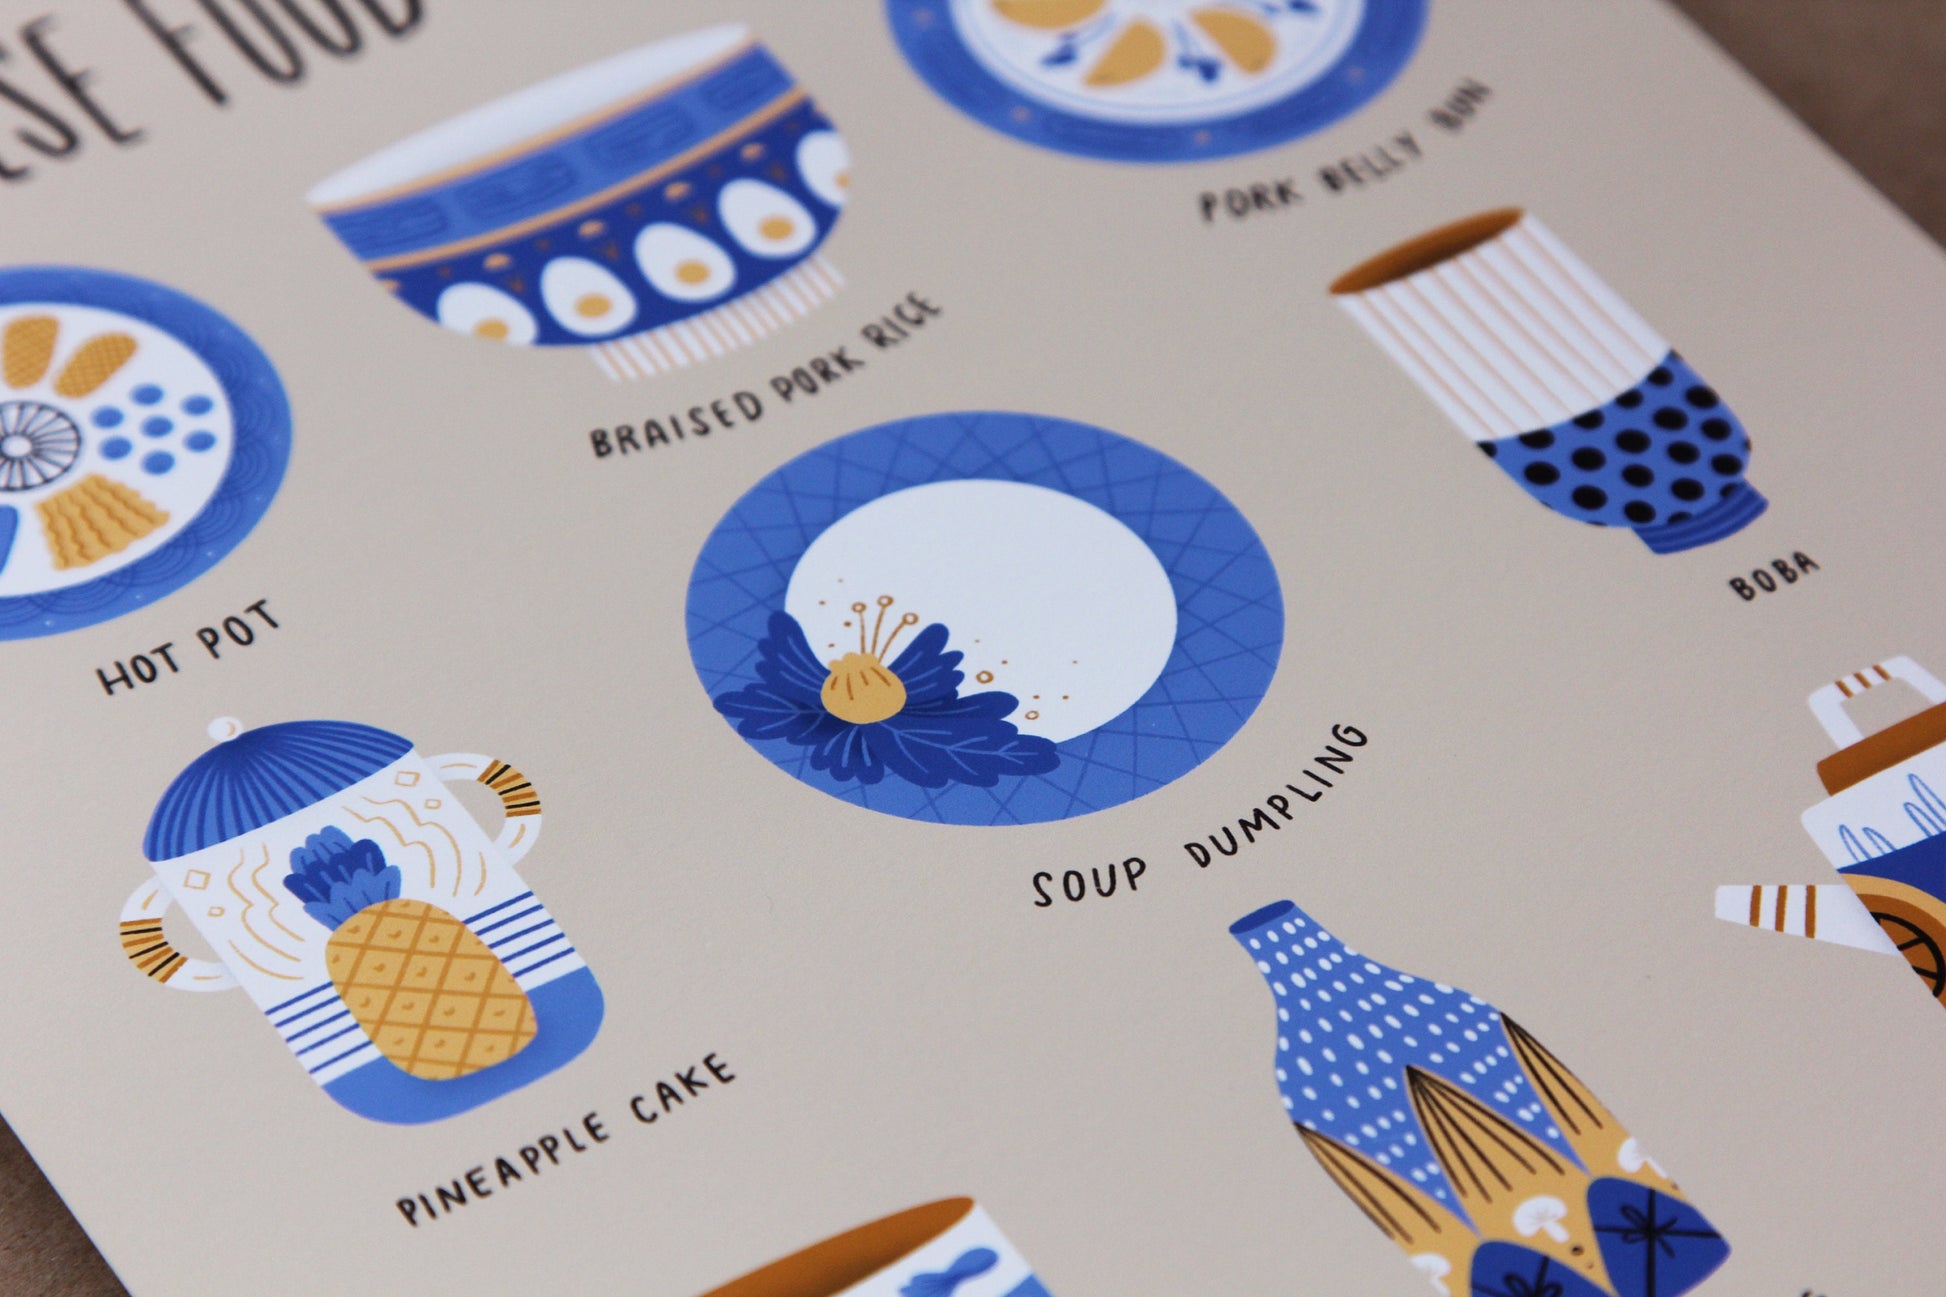 A close up of a JaneLi.Co print that says "Taiwanese Foods As Ceramics" with 9 different illustrations of ceramics over a brown background.